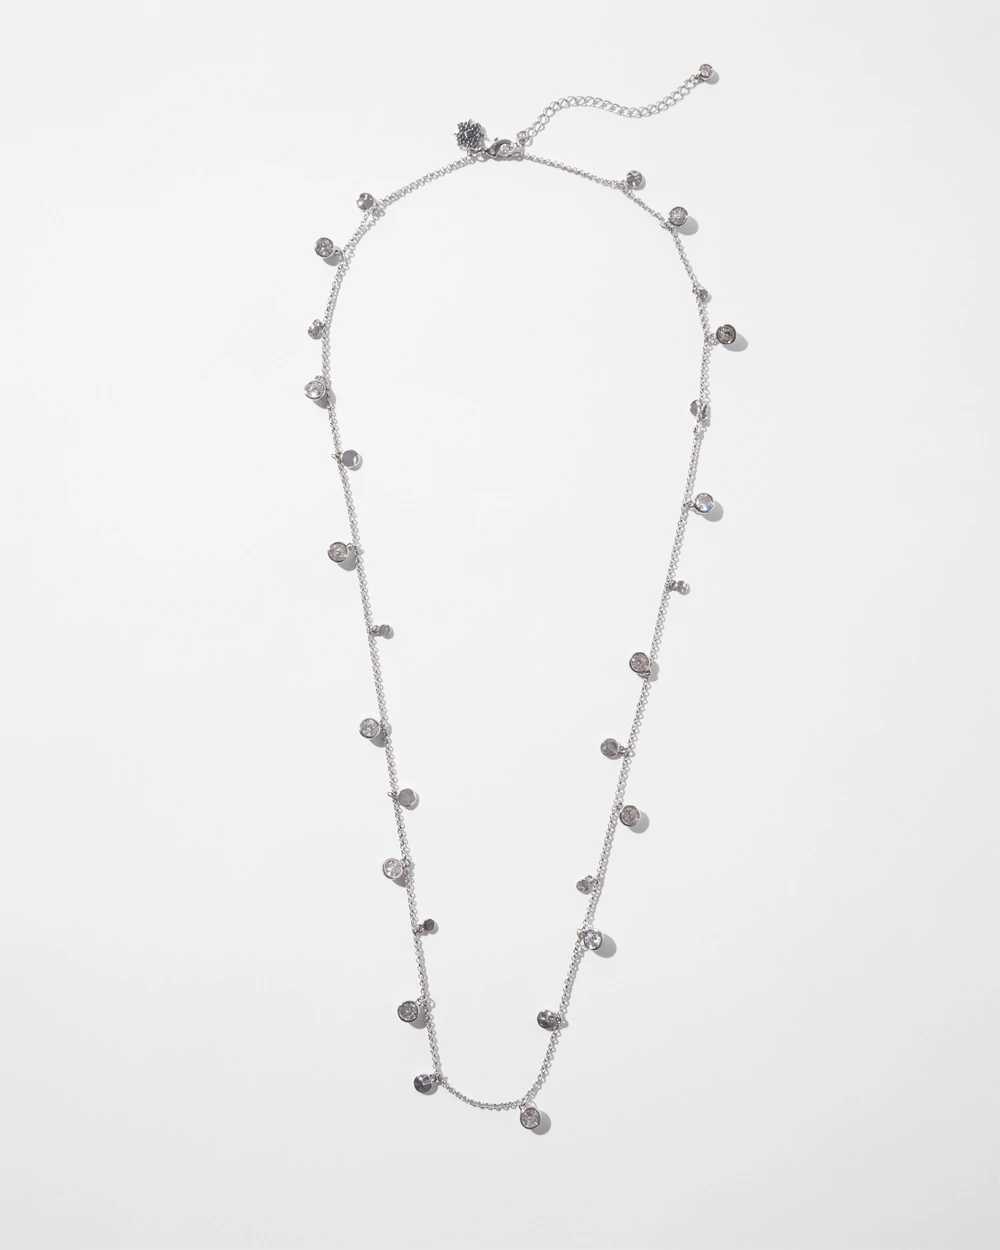 Silver Crystal Long Disc Necklace click to view larger image.